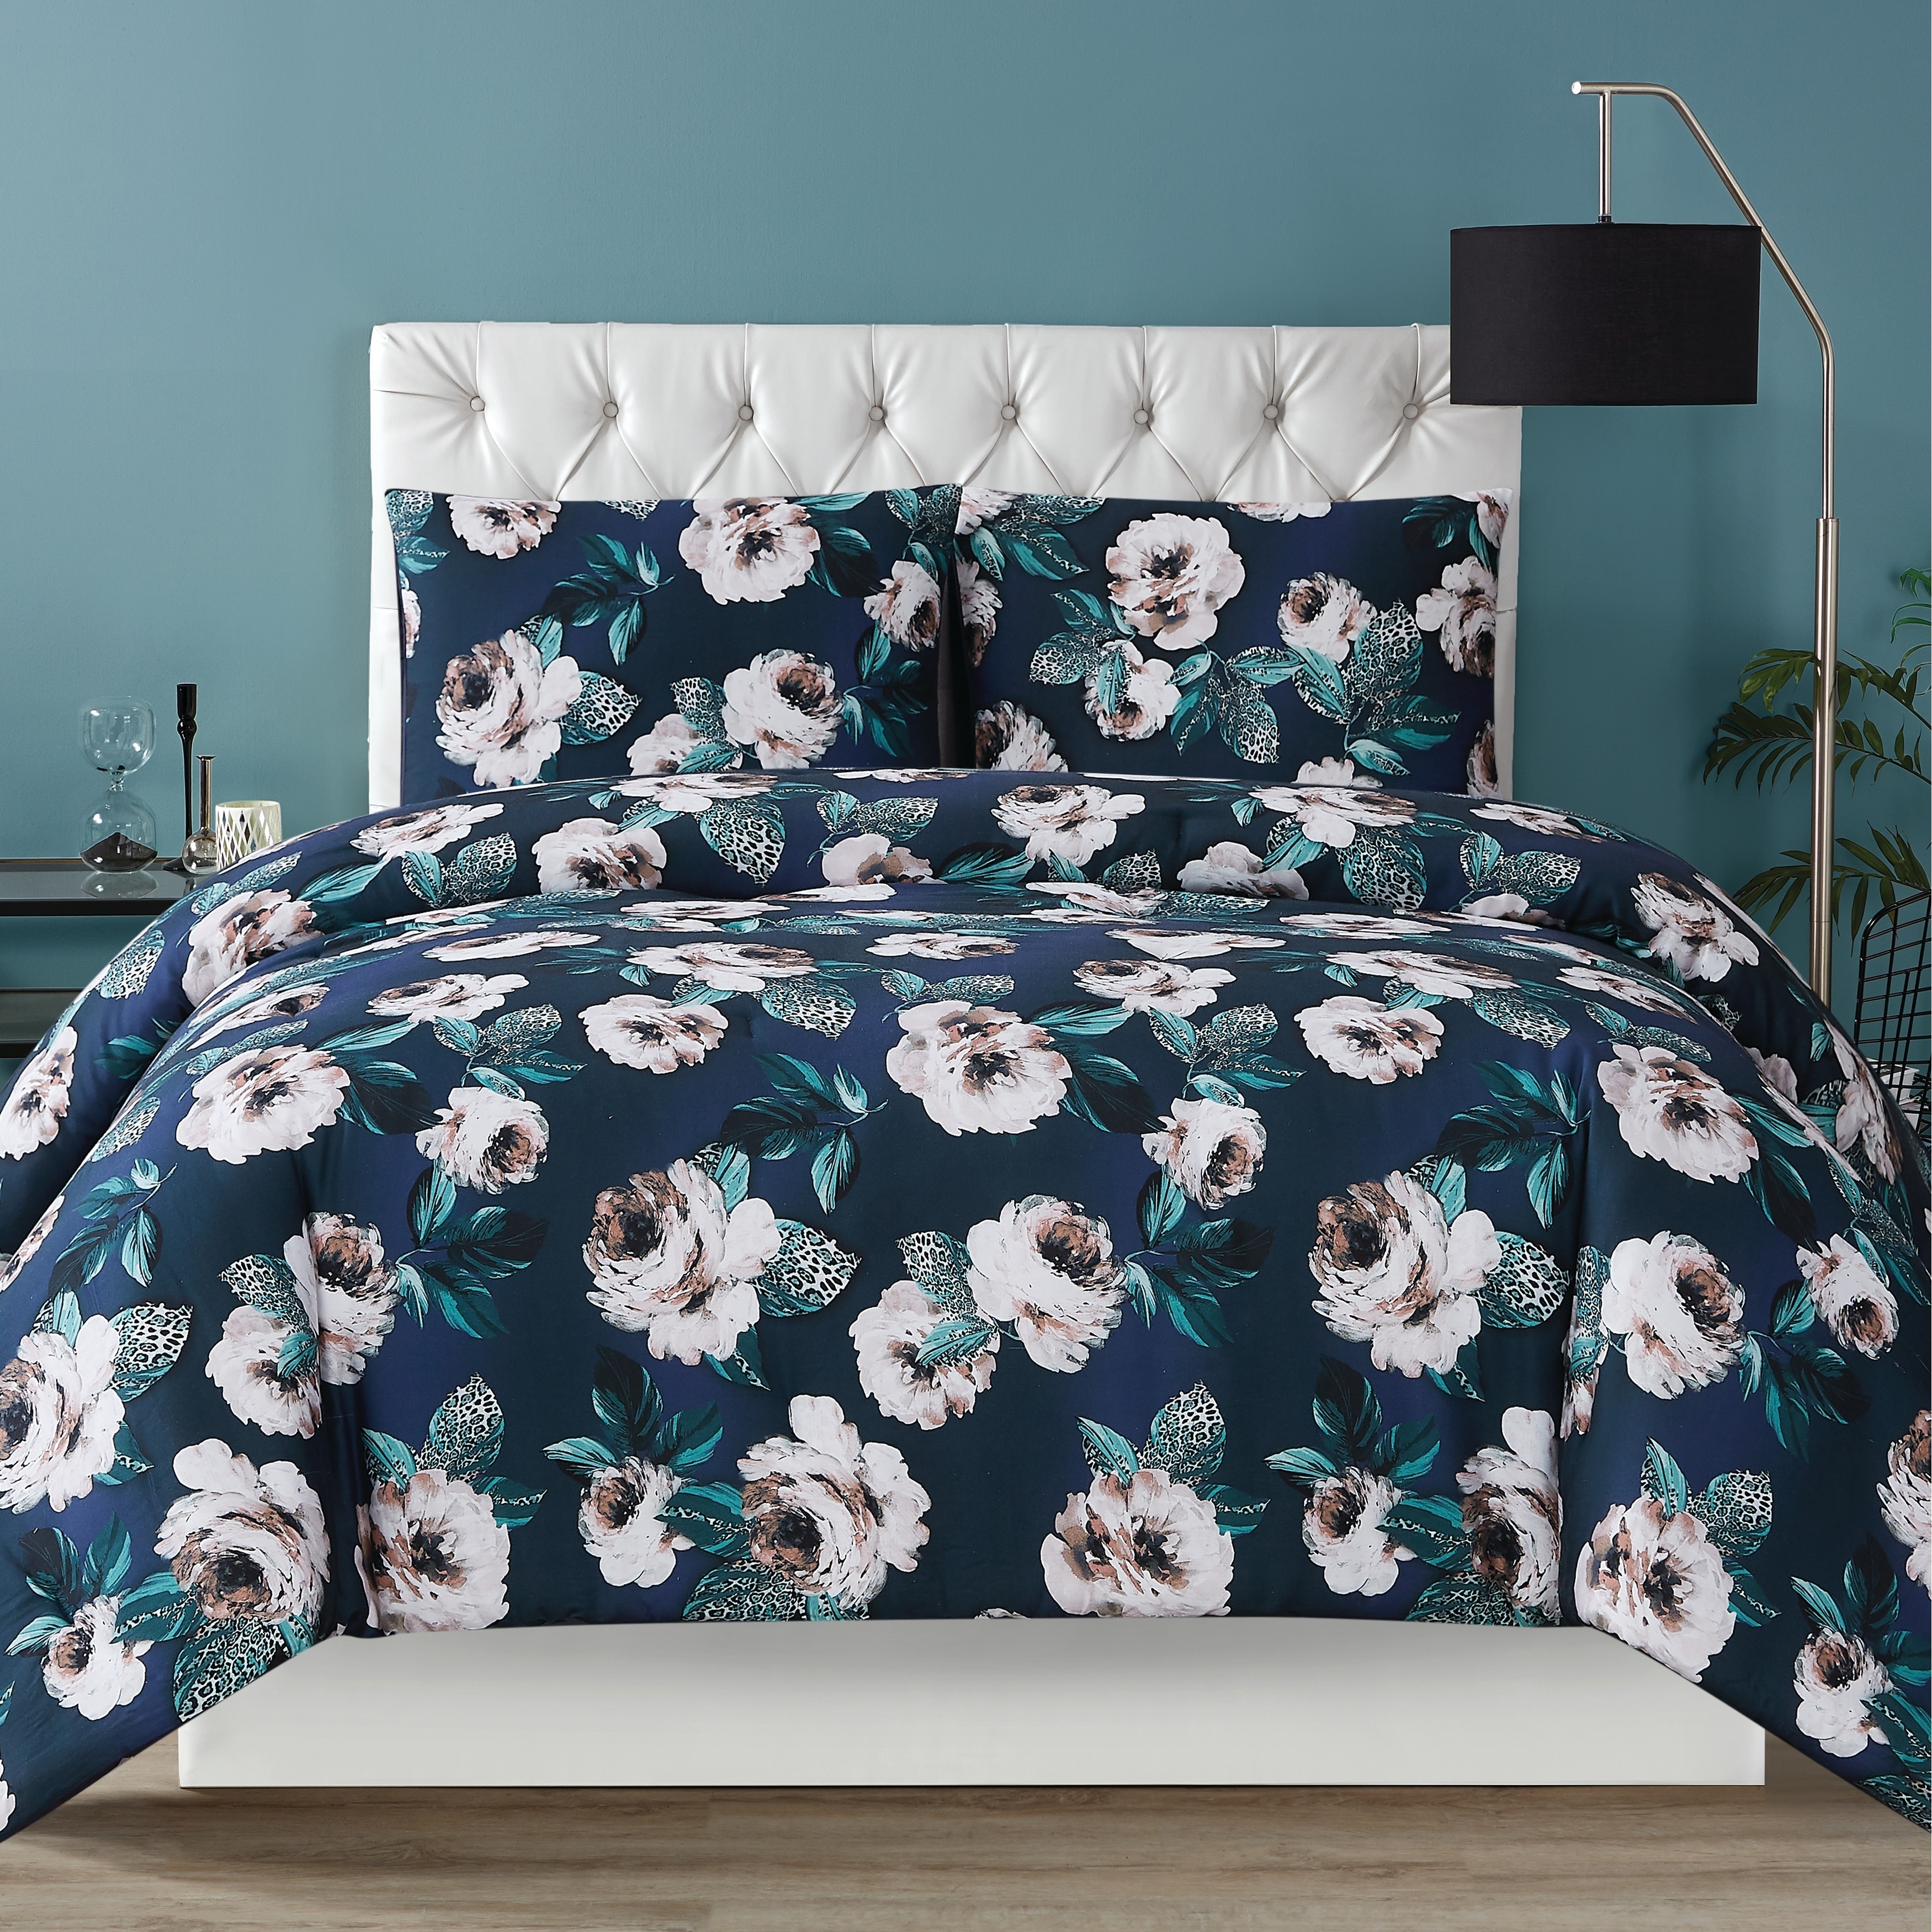 Shop Christian Siriano Ny Mags Floral 3 Piece Duvet Cover Set